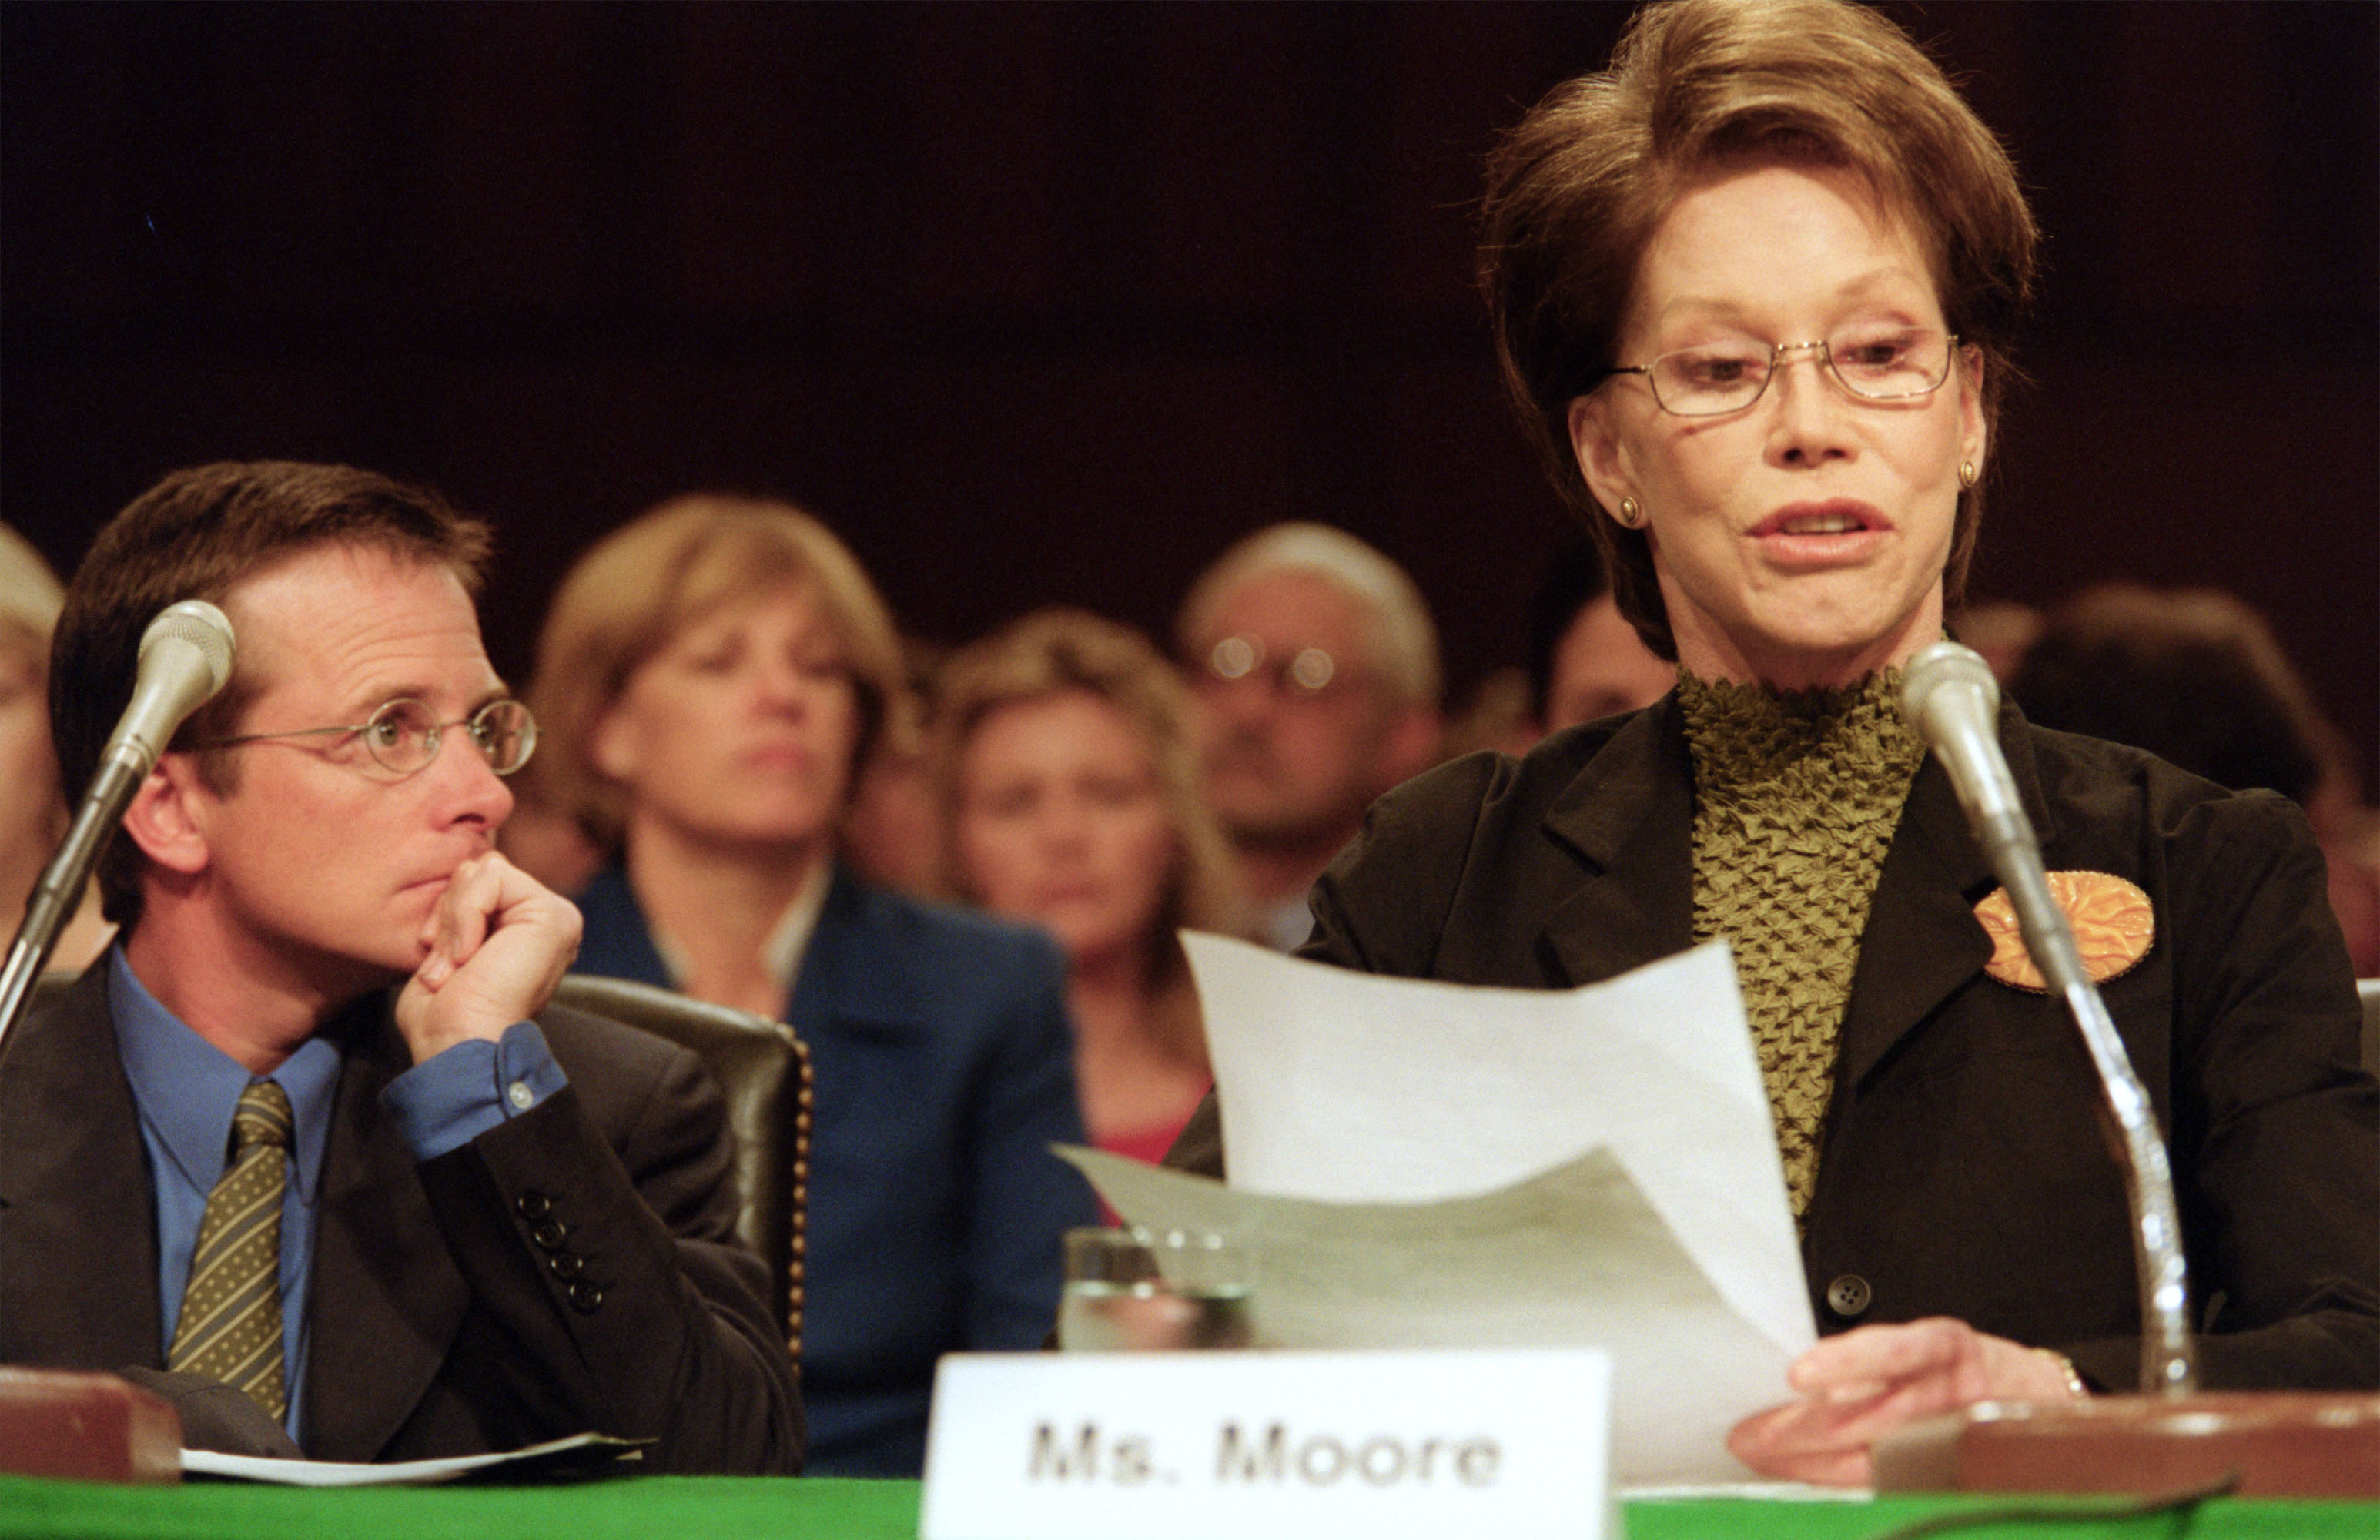 Actor Michael J. Fox looks on as actress Mary Tyler Moore testifies on Capitol Hill on Sept. 14, 2000, before a Senate Appropriations subcommittee hearing on stem cell research. They urged the subcommittee to release federal funding for research involving embryonic stem cells, which they said could lead to cures for diseases such as Parkinson's, juvenile diabetes and Alzheimer's.